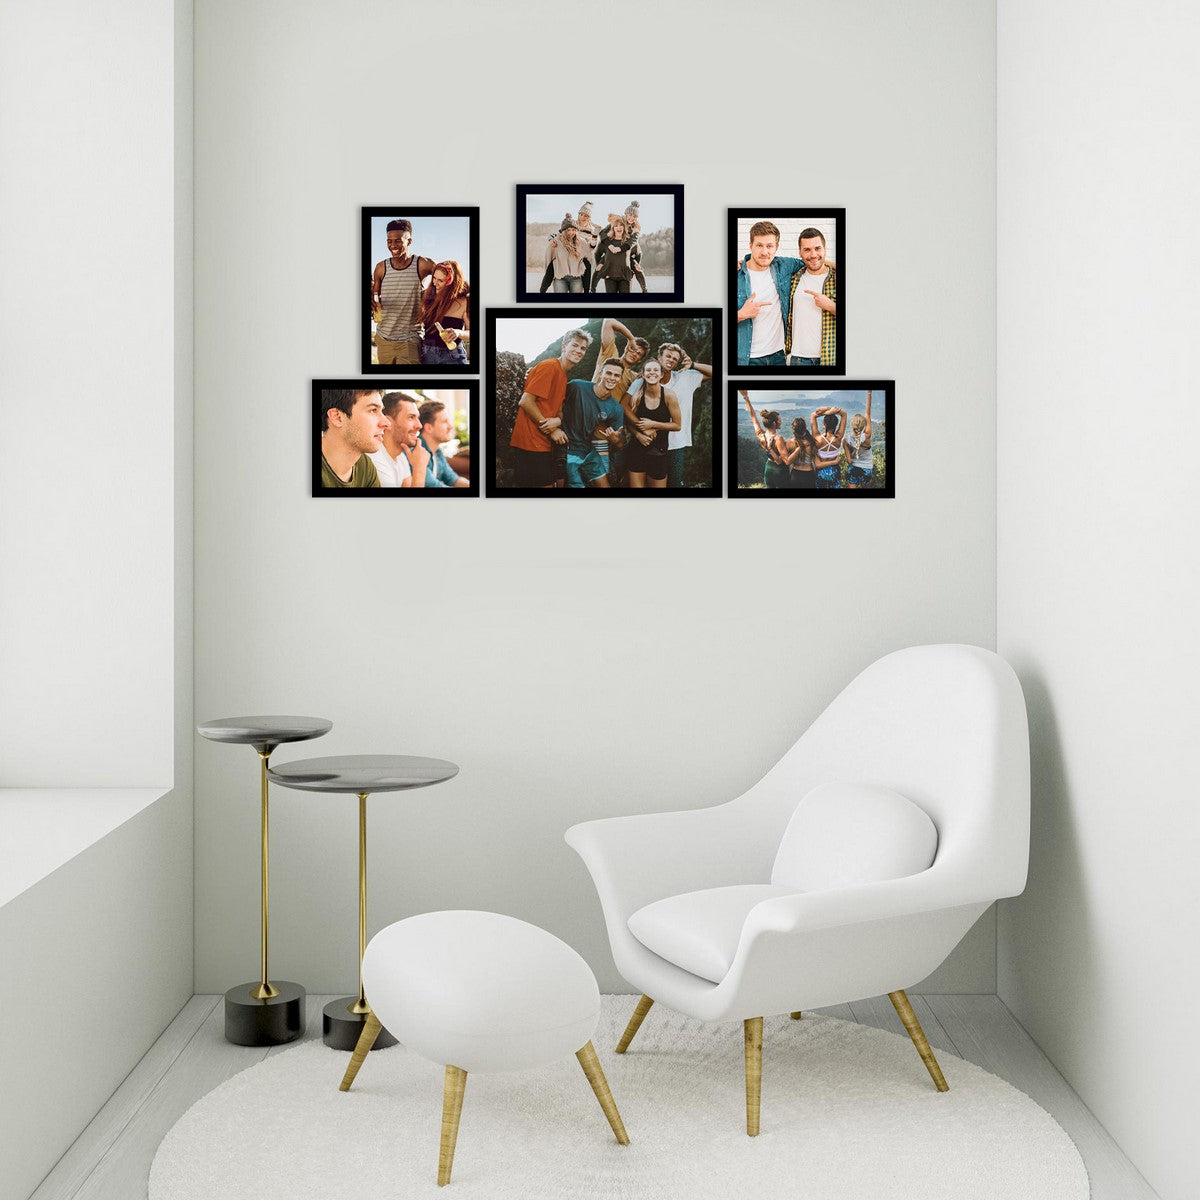 Memory Wall Collage Photo Frame - Set of 6 Photo Frames for 5 Photos of 5"x7", 1 Photos of 8"x10" 2